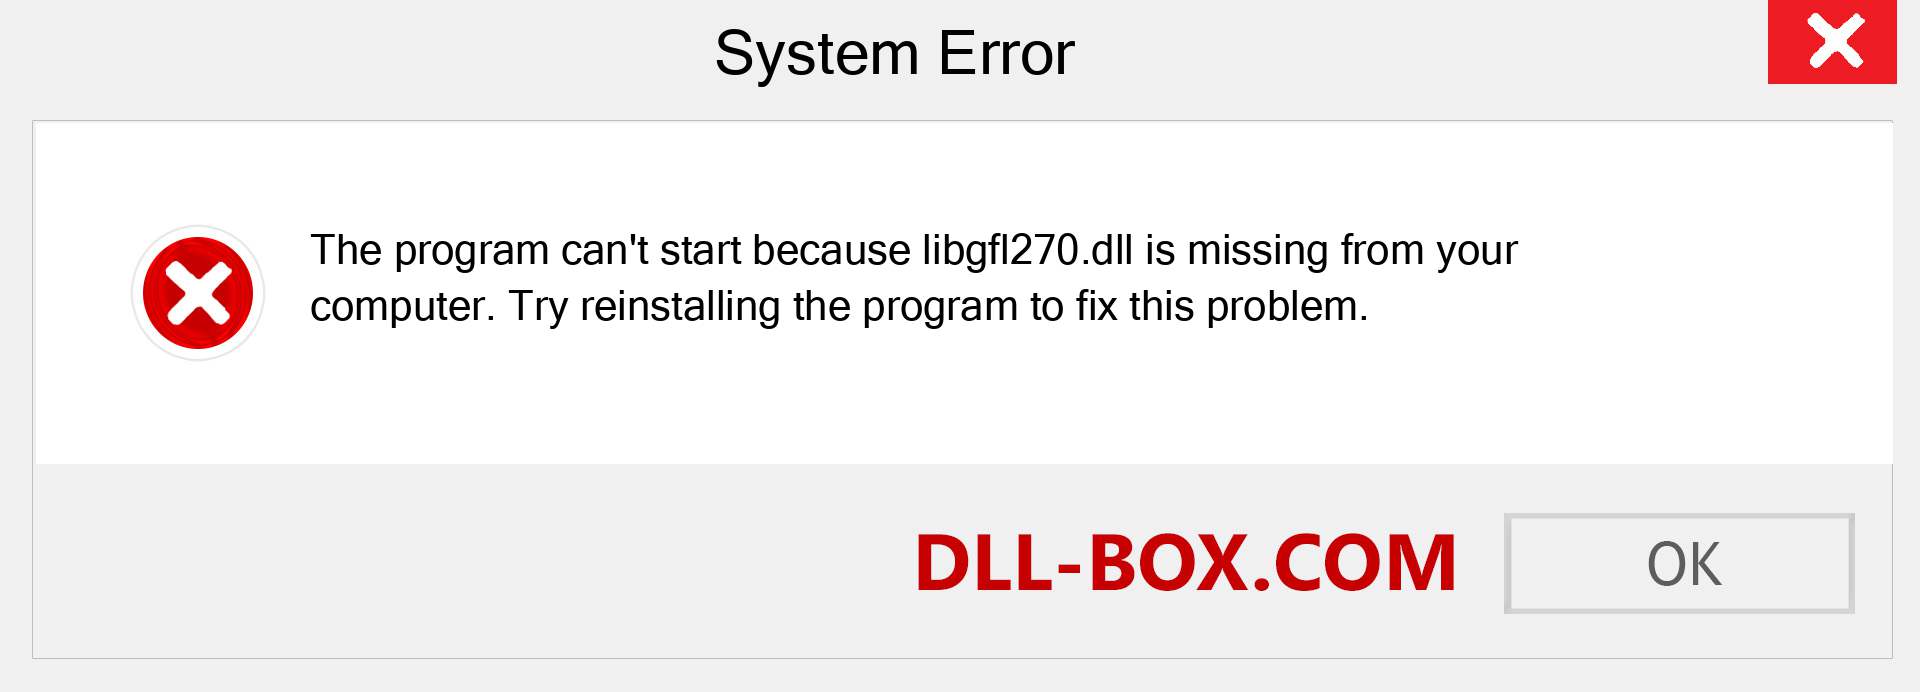  libgfl270.dll file is missing?. Download for Windows 7, 8, 10 - Fix  libgfl270 dll Missing Error on Windows, photos, images